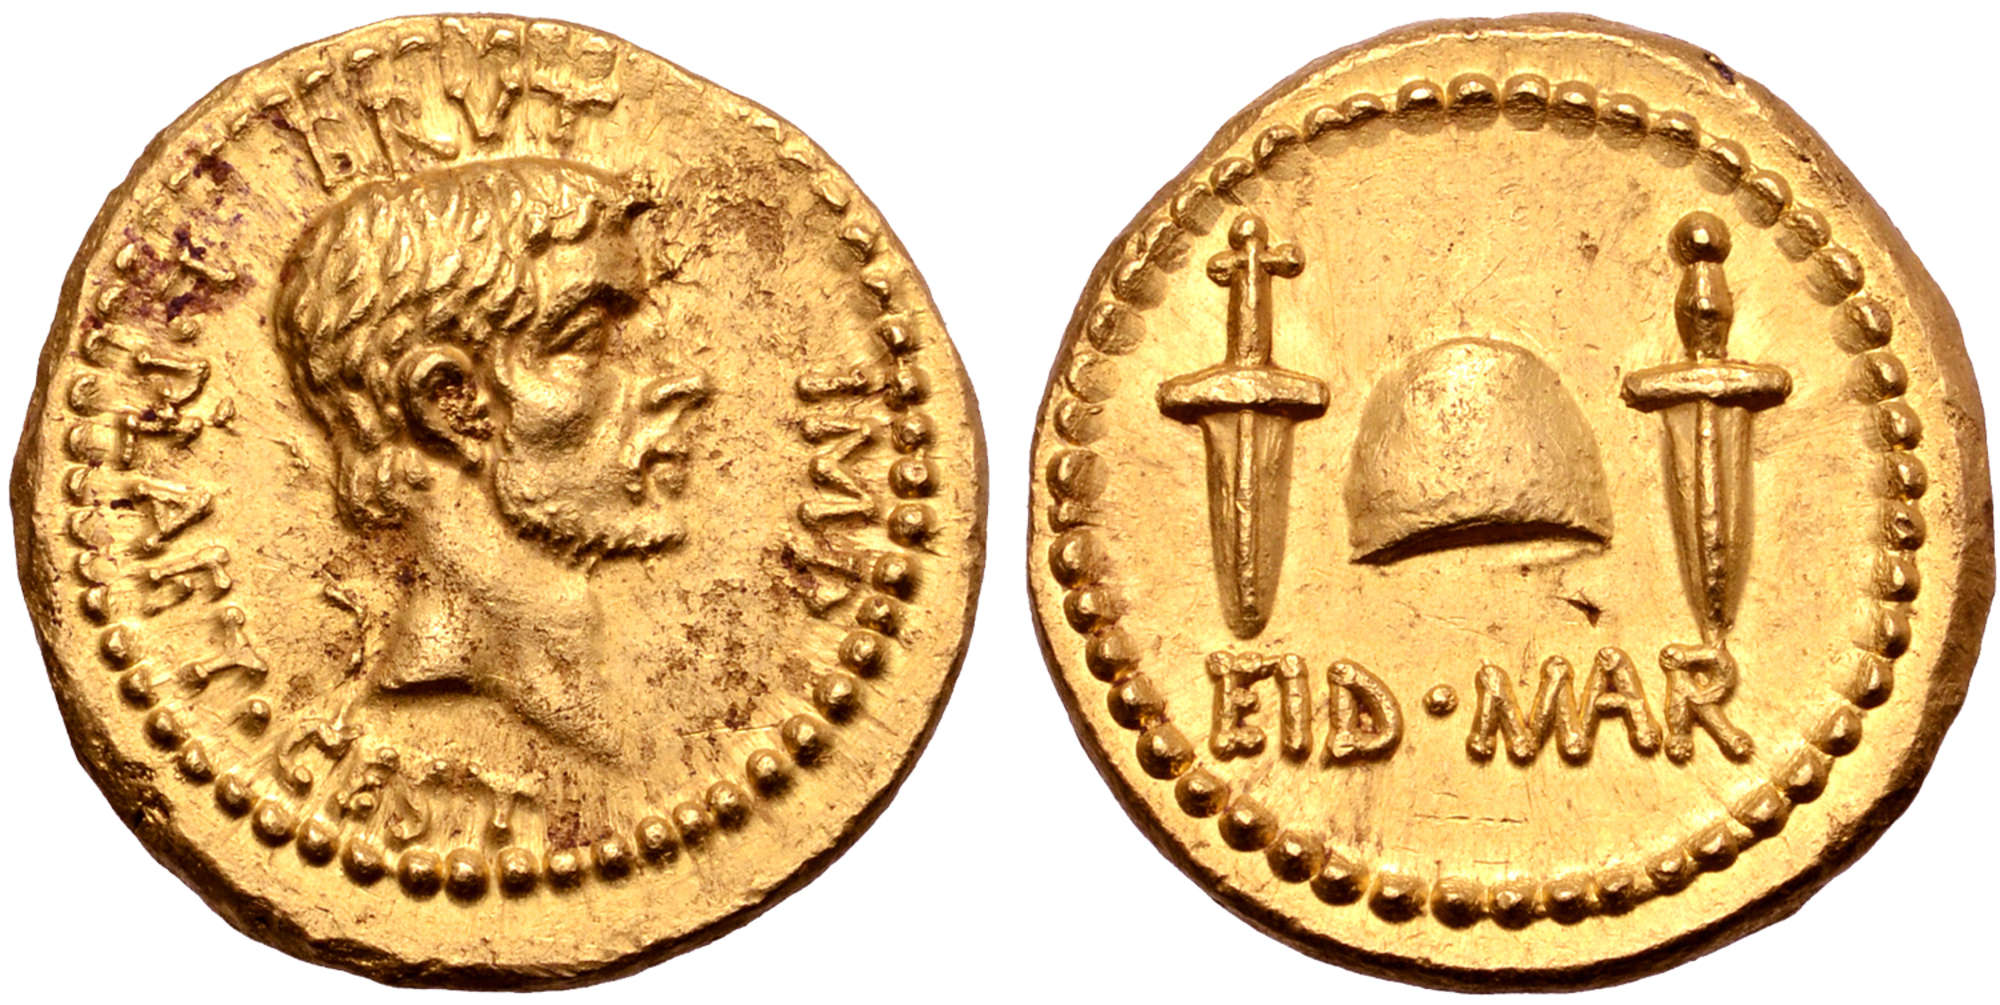 Uproar in auction circles: the historically most expensive aureus EID MAR is a fraud!